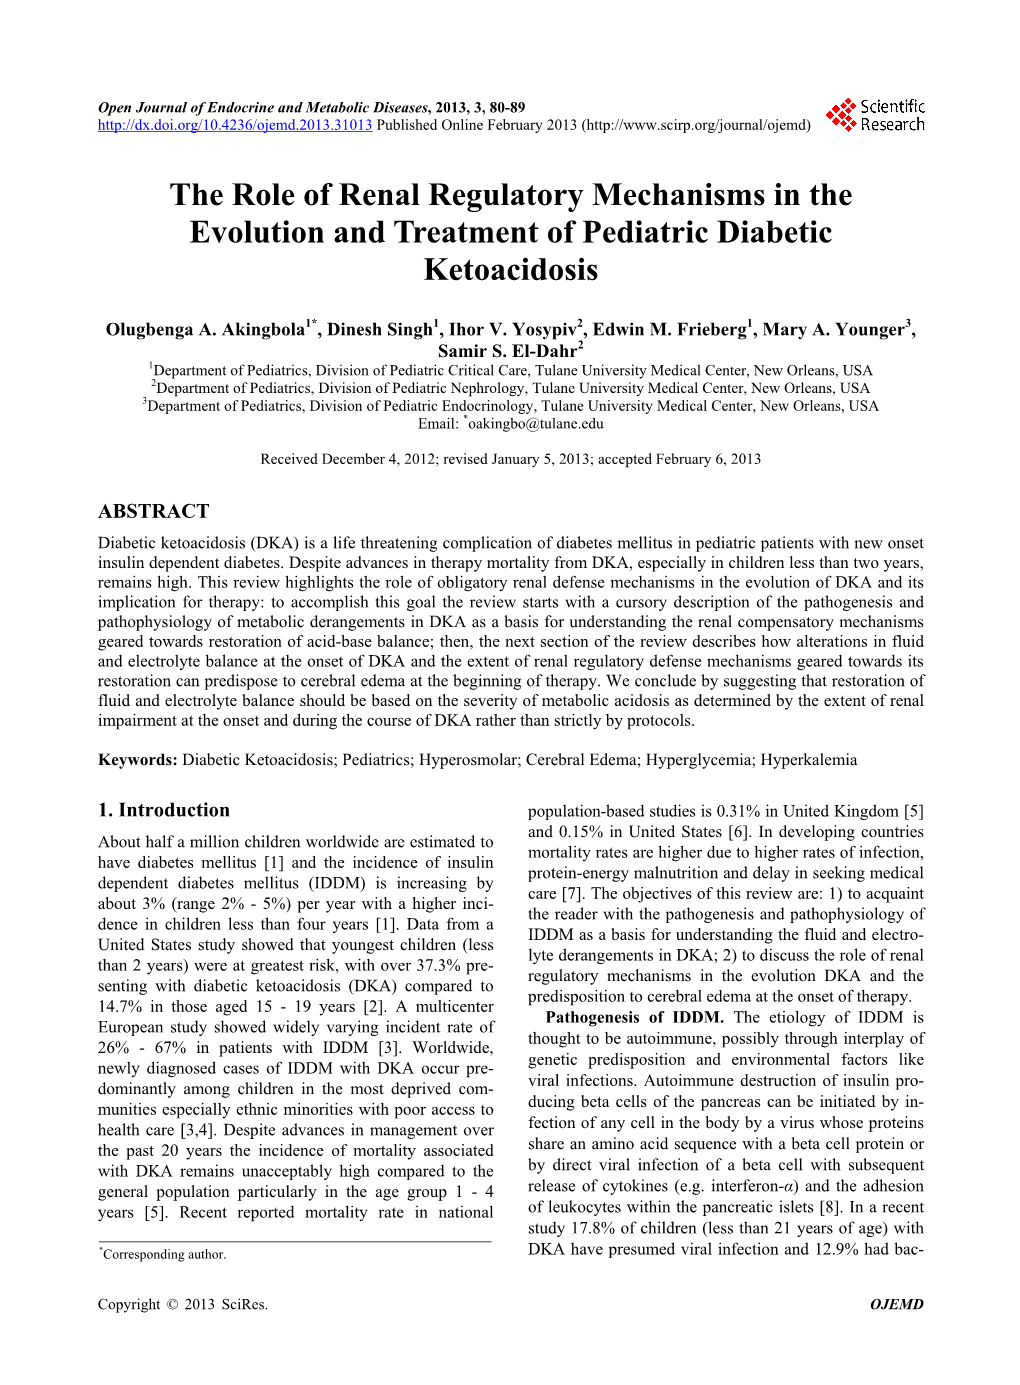 The Role of Renal Regulatory Mechanisms in the Evolution and Treatment of Pediatric Diabetic Ketoacidosis